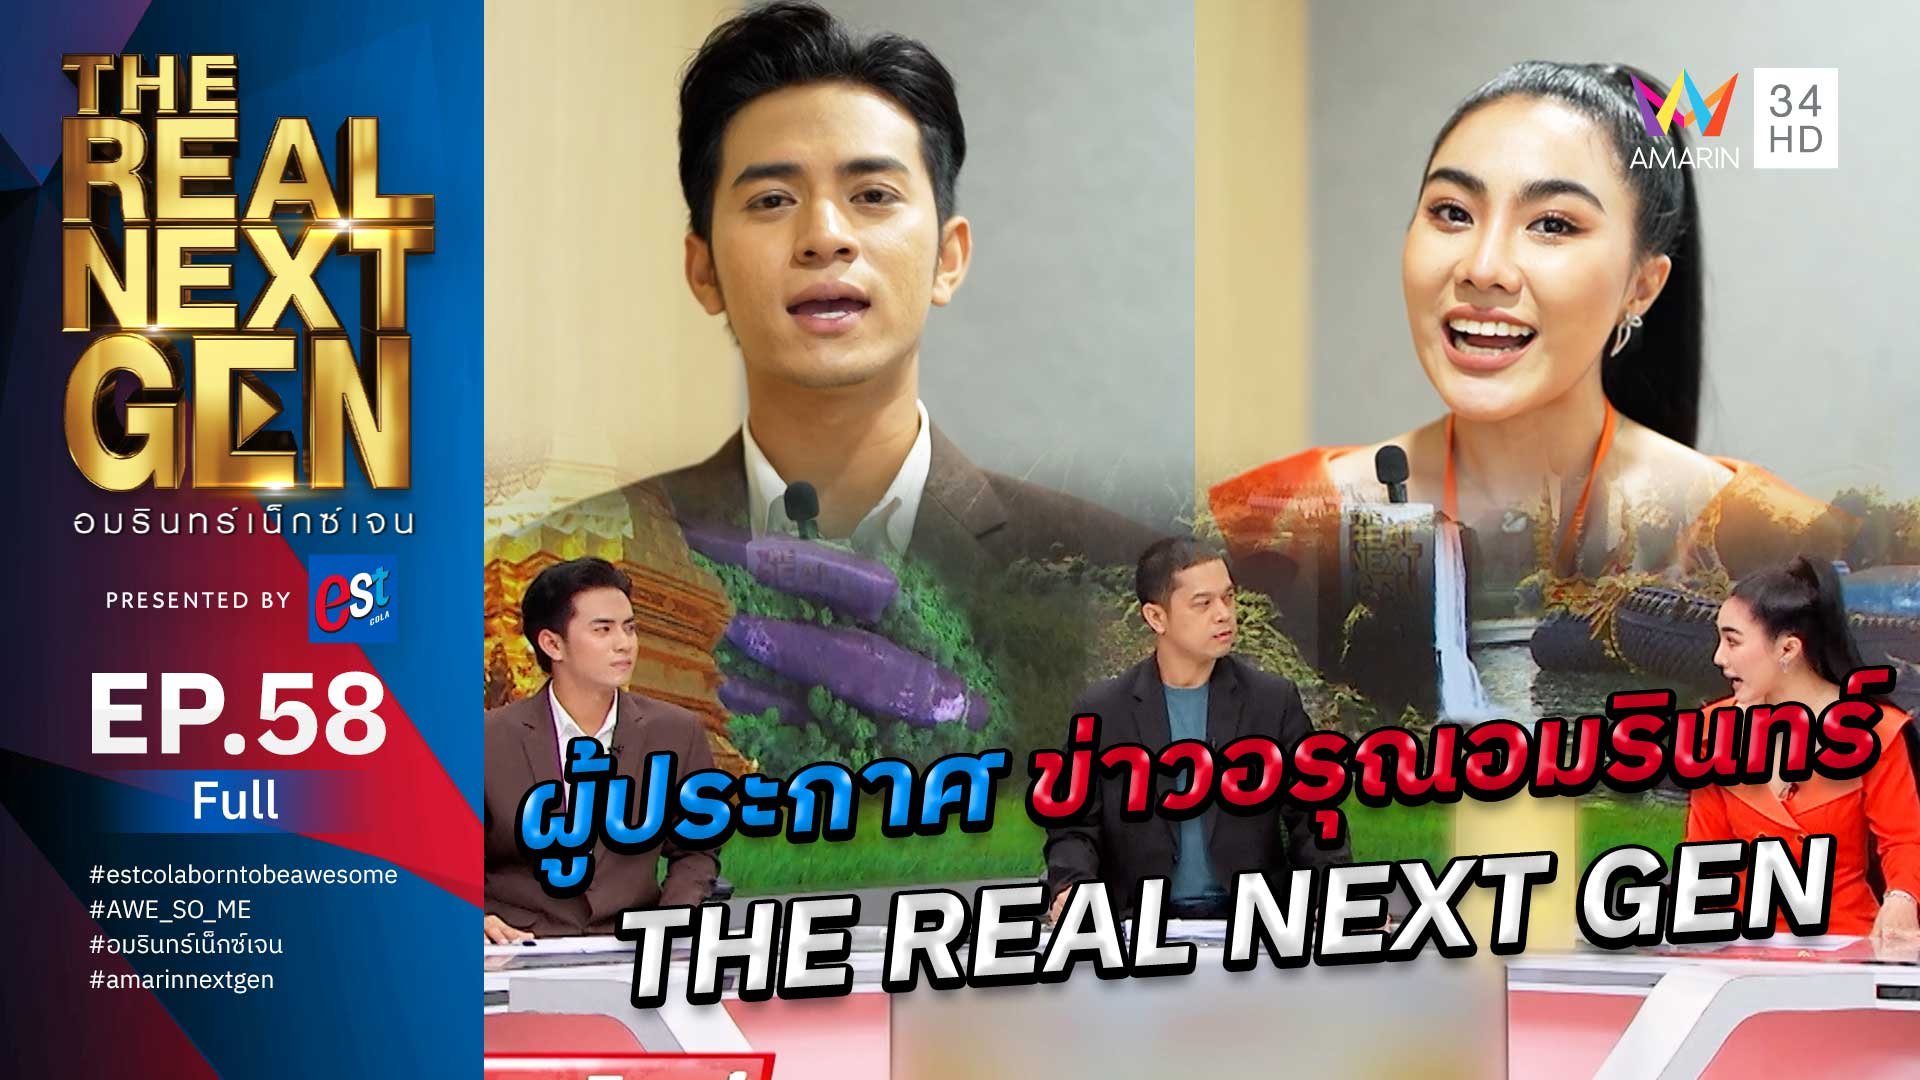 The Real Next Gen อมรินทร์เน็กซ์เจน | EP.58 THE REAL NEXT GEN อมรินทร์เน็กซ์เจน Presented By est cola  | 6 ธ.ค. 66 | AMARIN TVHD34